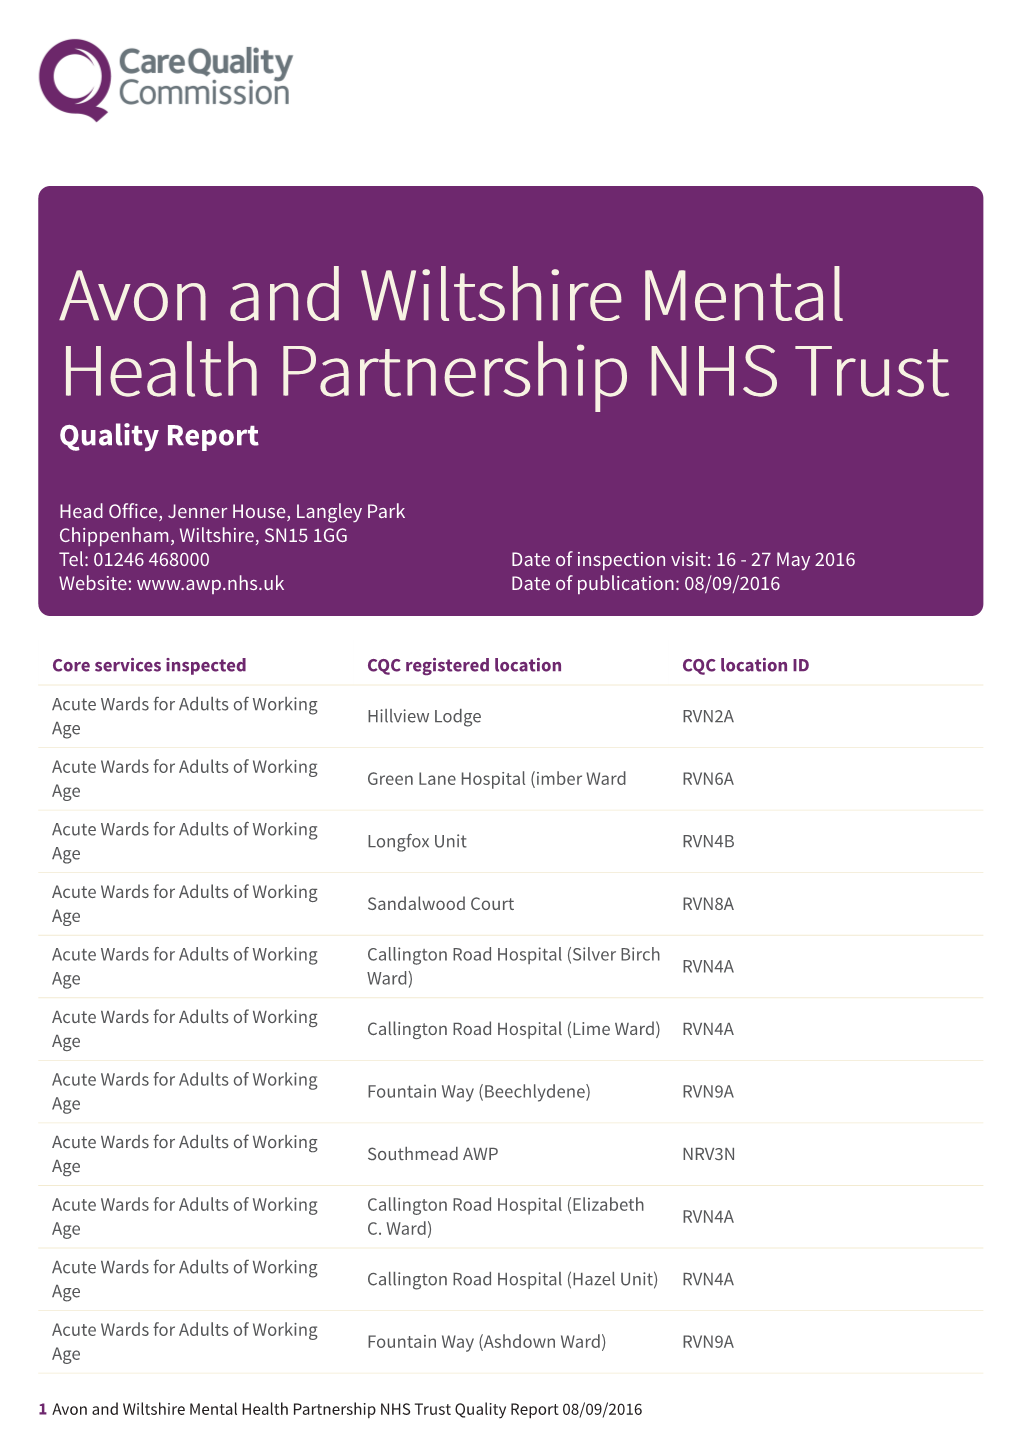 Avon and Wiltshire Mental Health Partnership NHS Trust Quality Report